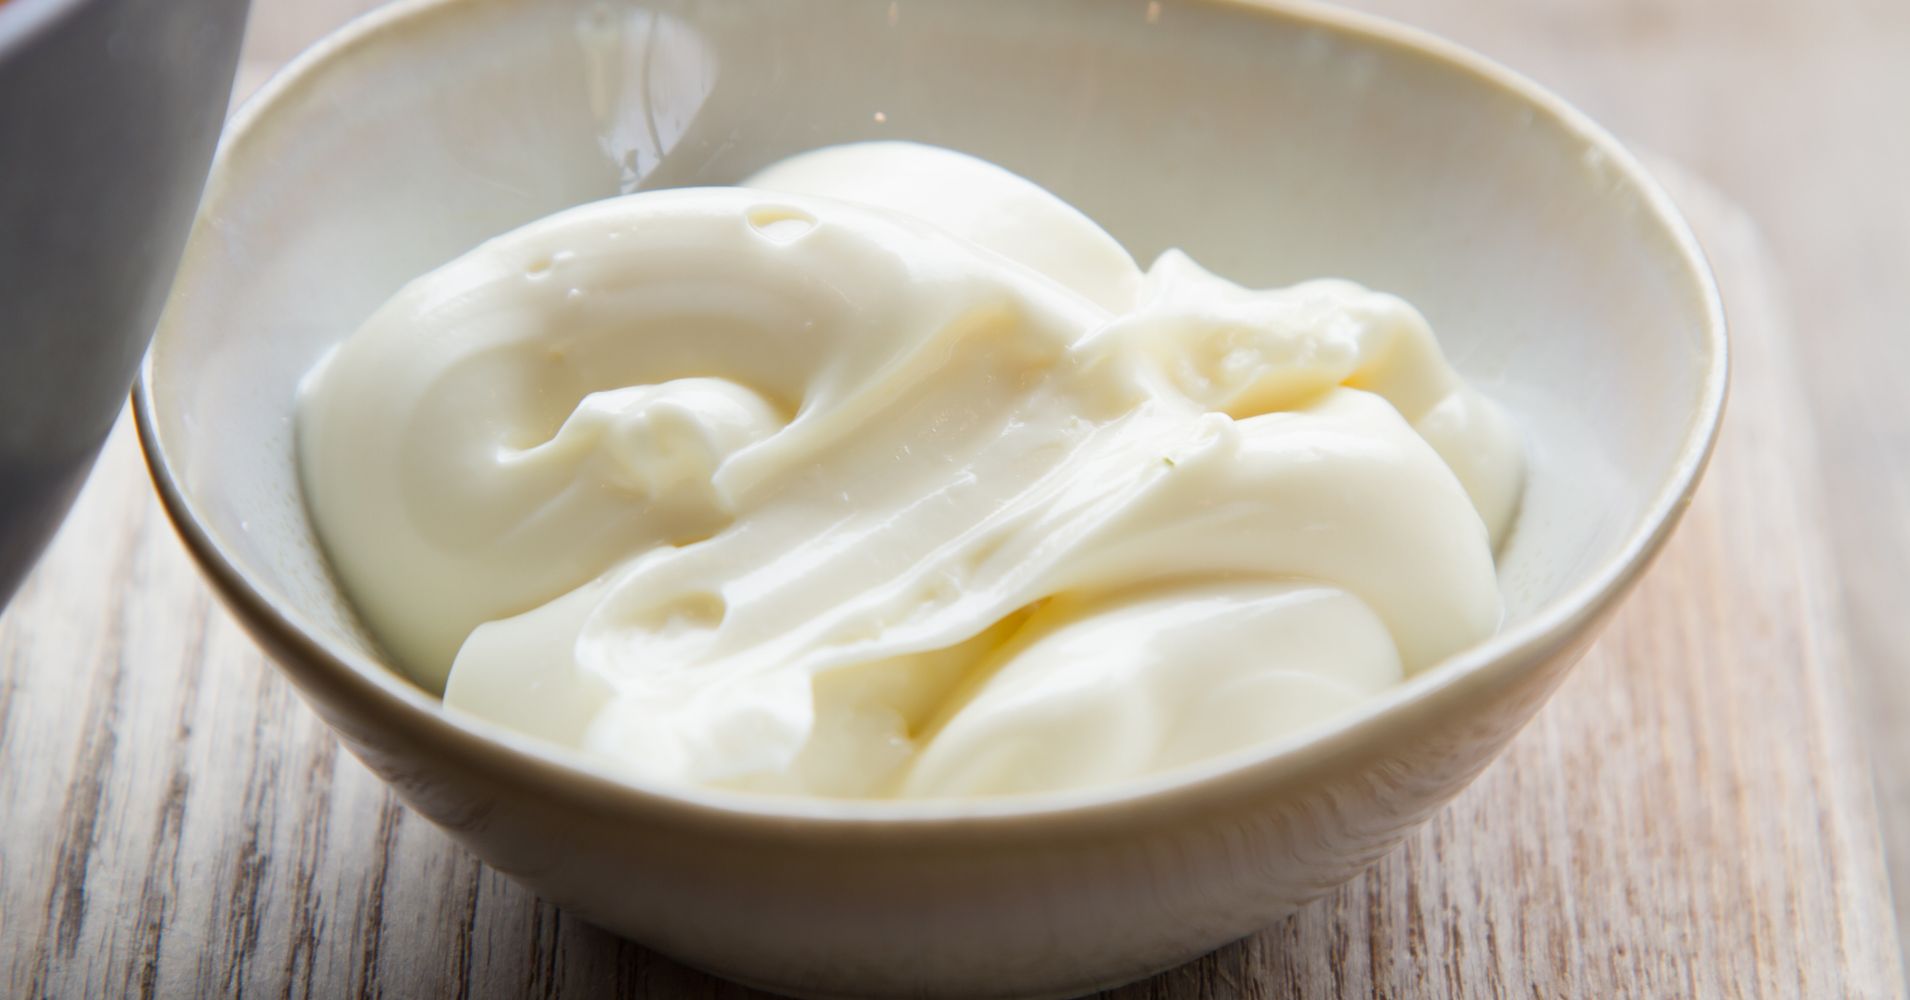 Experts Explain Why People Are Disgusted By Mayonnaise | HuffPost